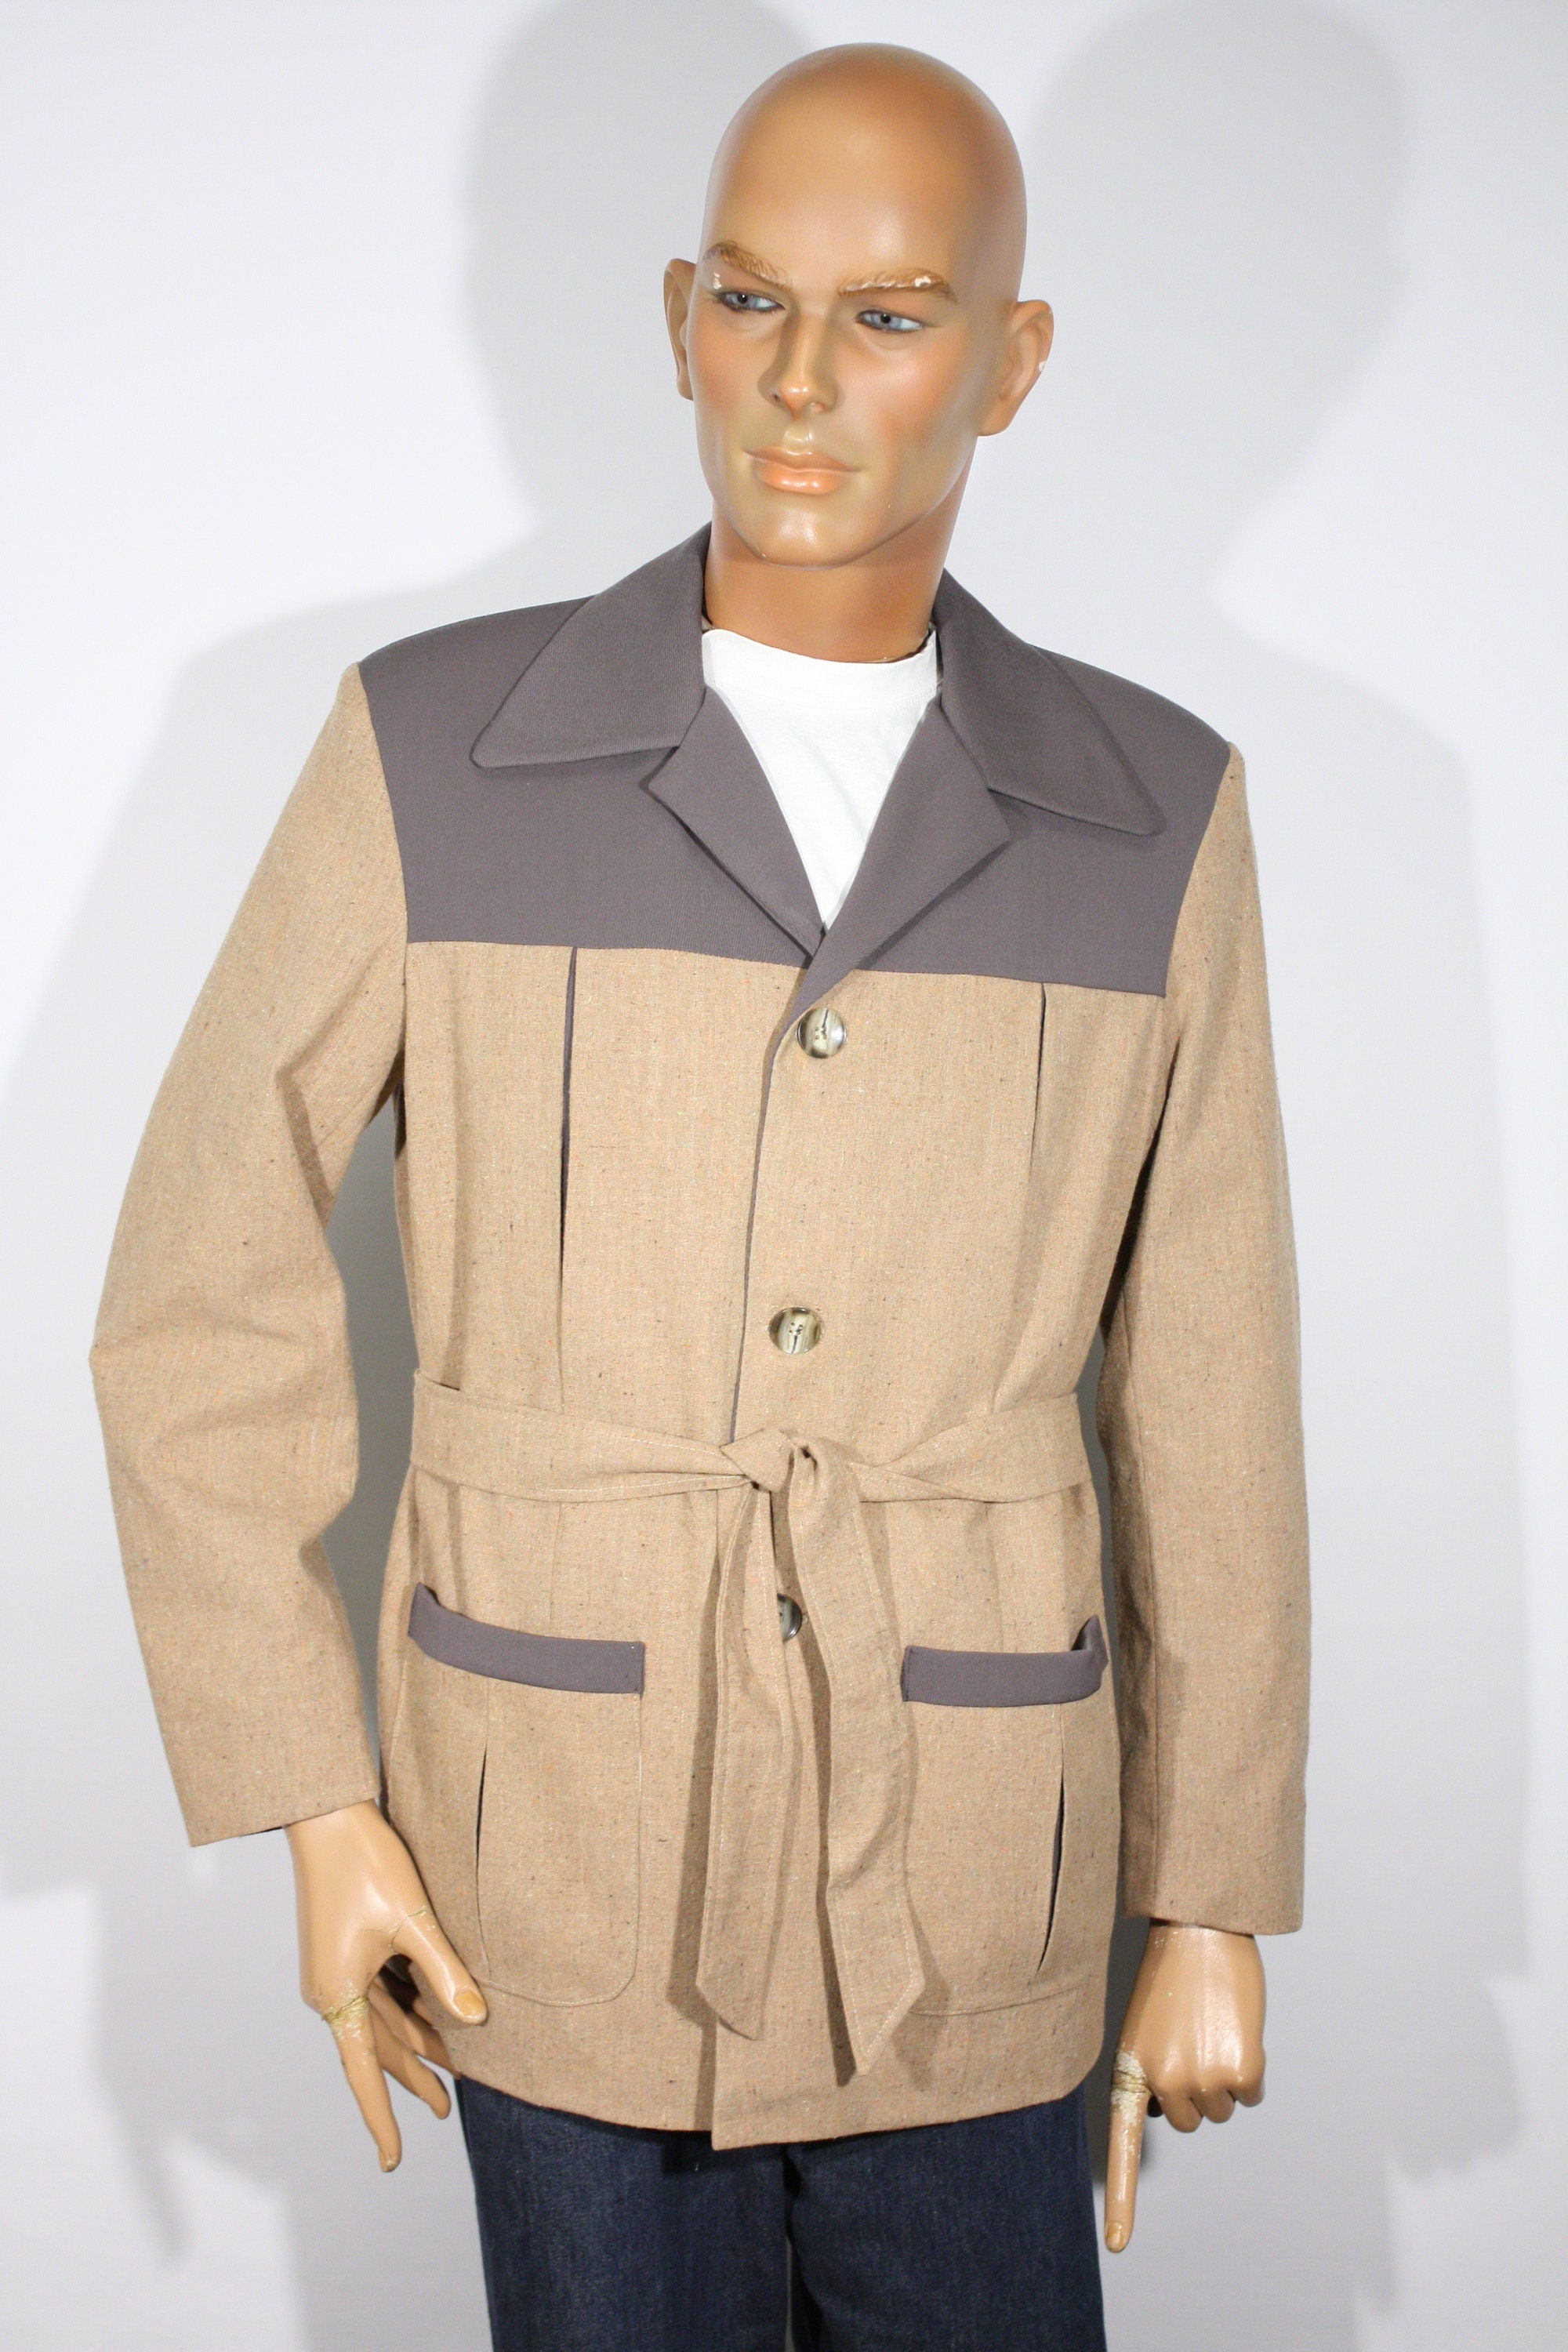 Vintage 1940s/50s Cropped Fly Fishing Jacket 